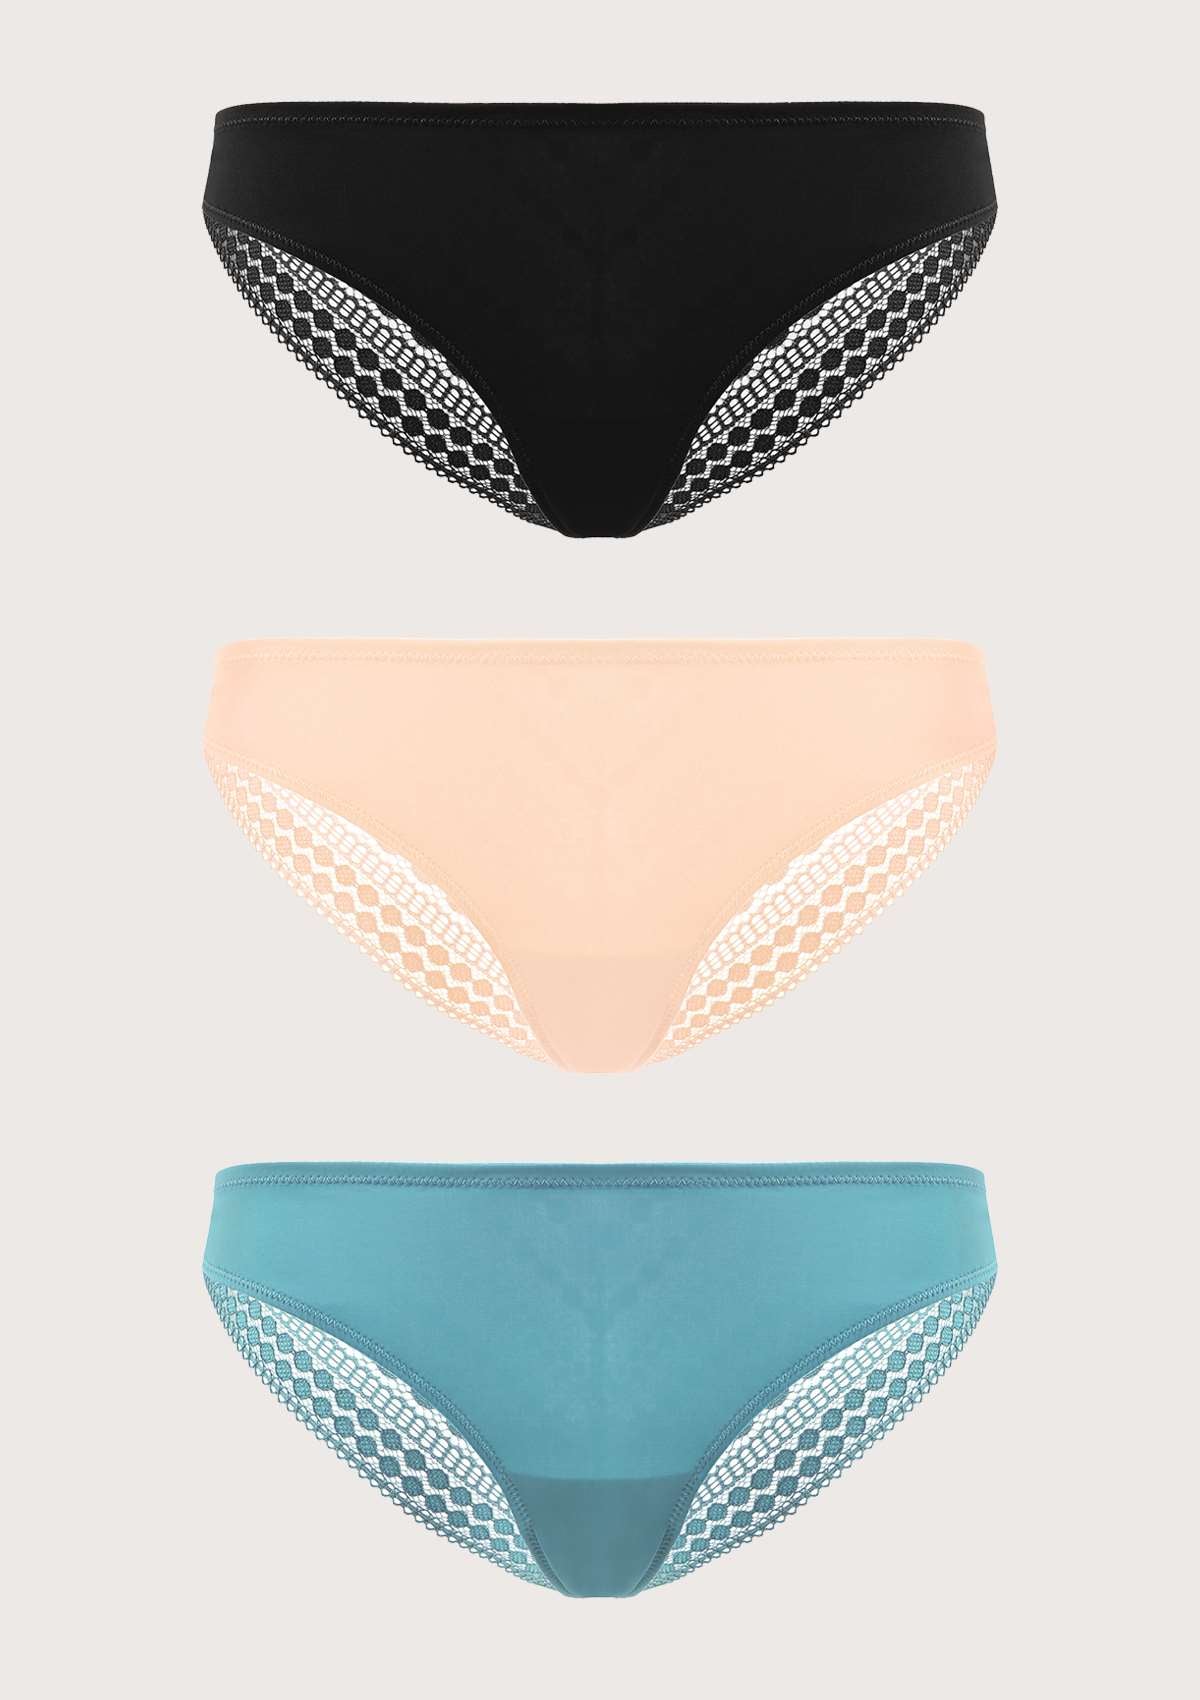 HSIA Polka Dot Super Soft Lace Back Cheeky Panties 3 Pack - M / Black+Frosty Green+Pink